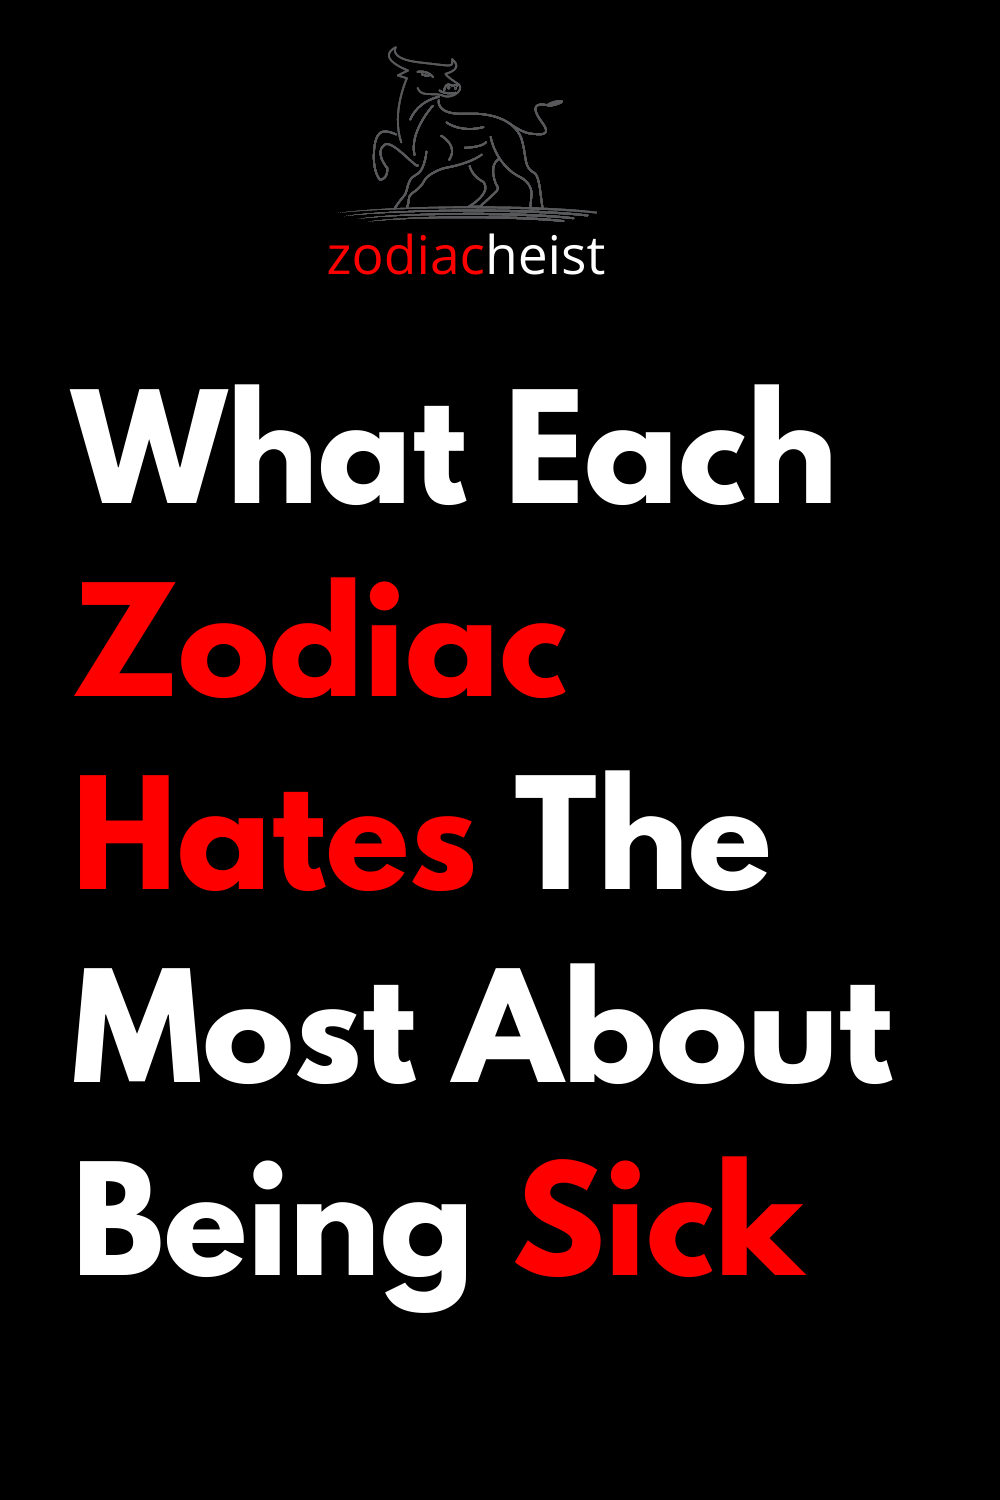 What Each Zodiac Hates The Most About Being Sick